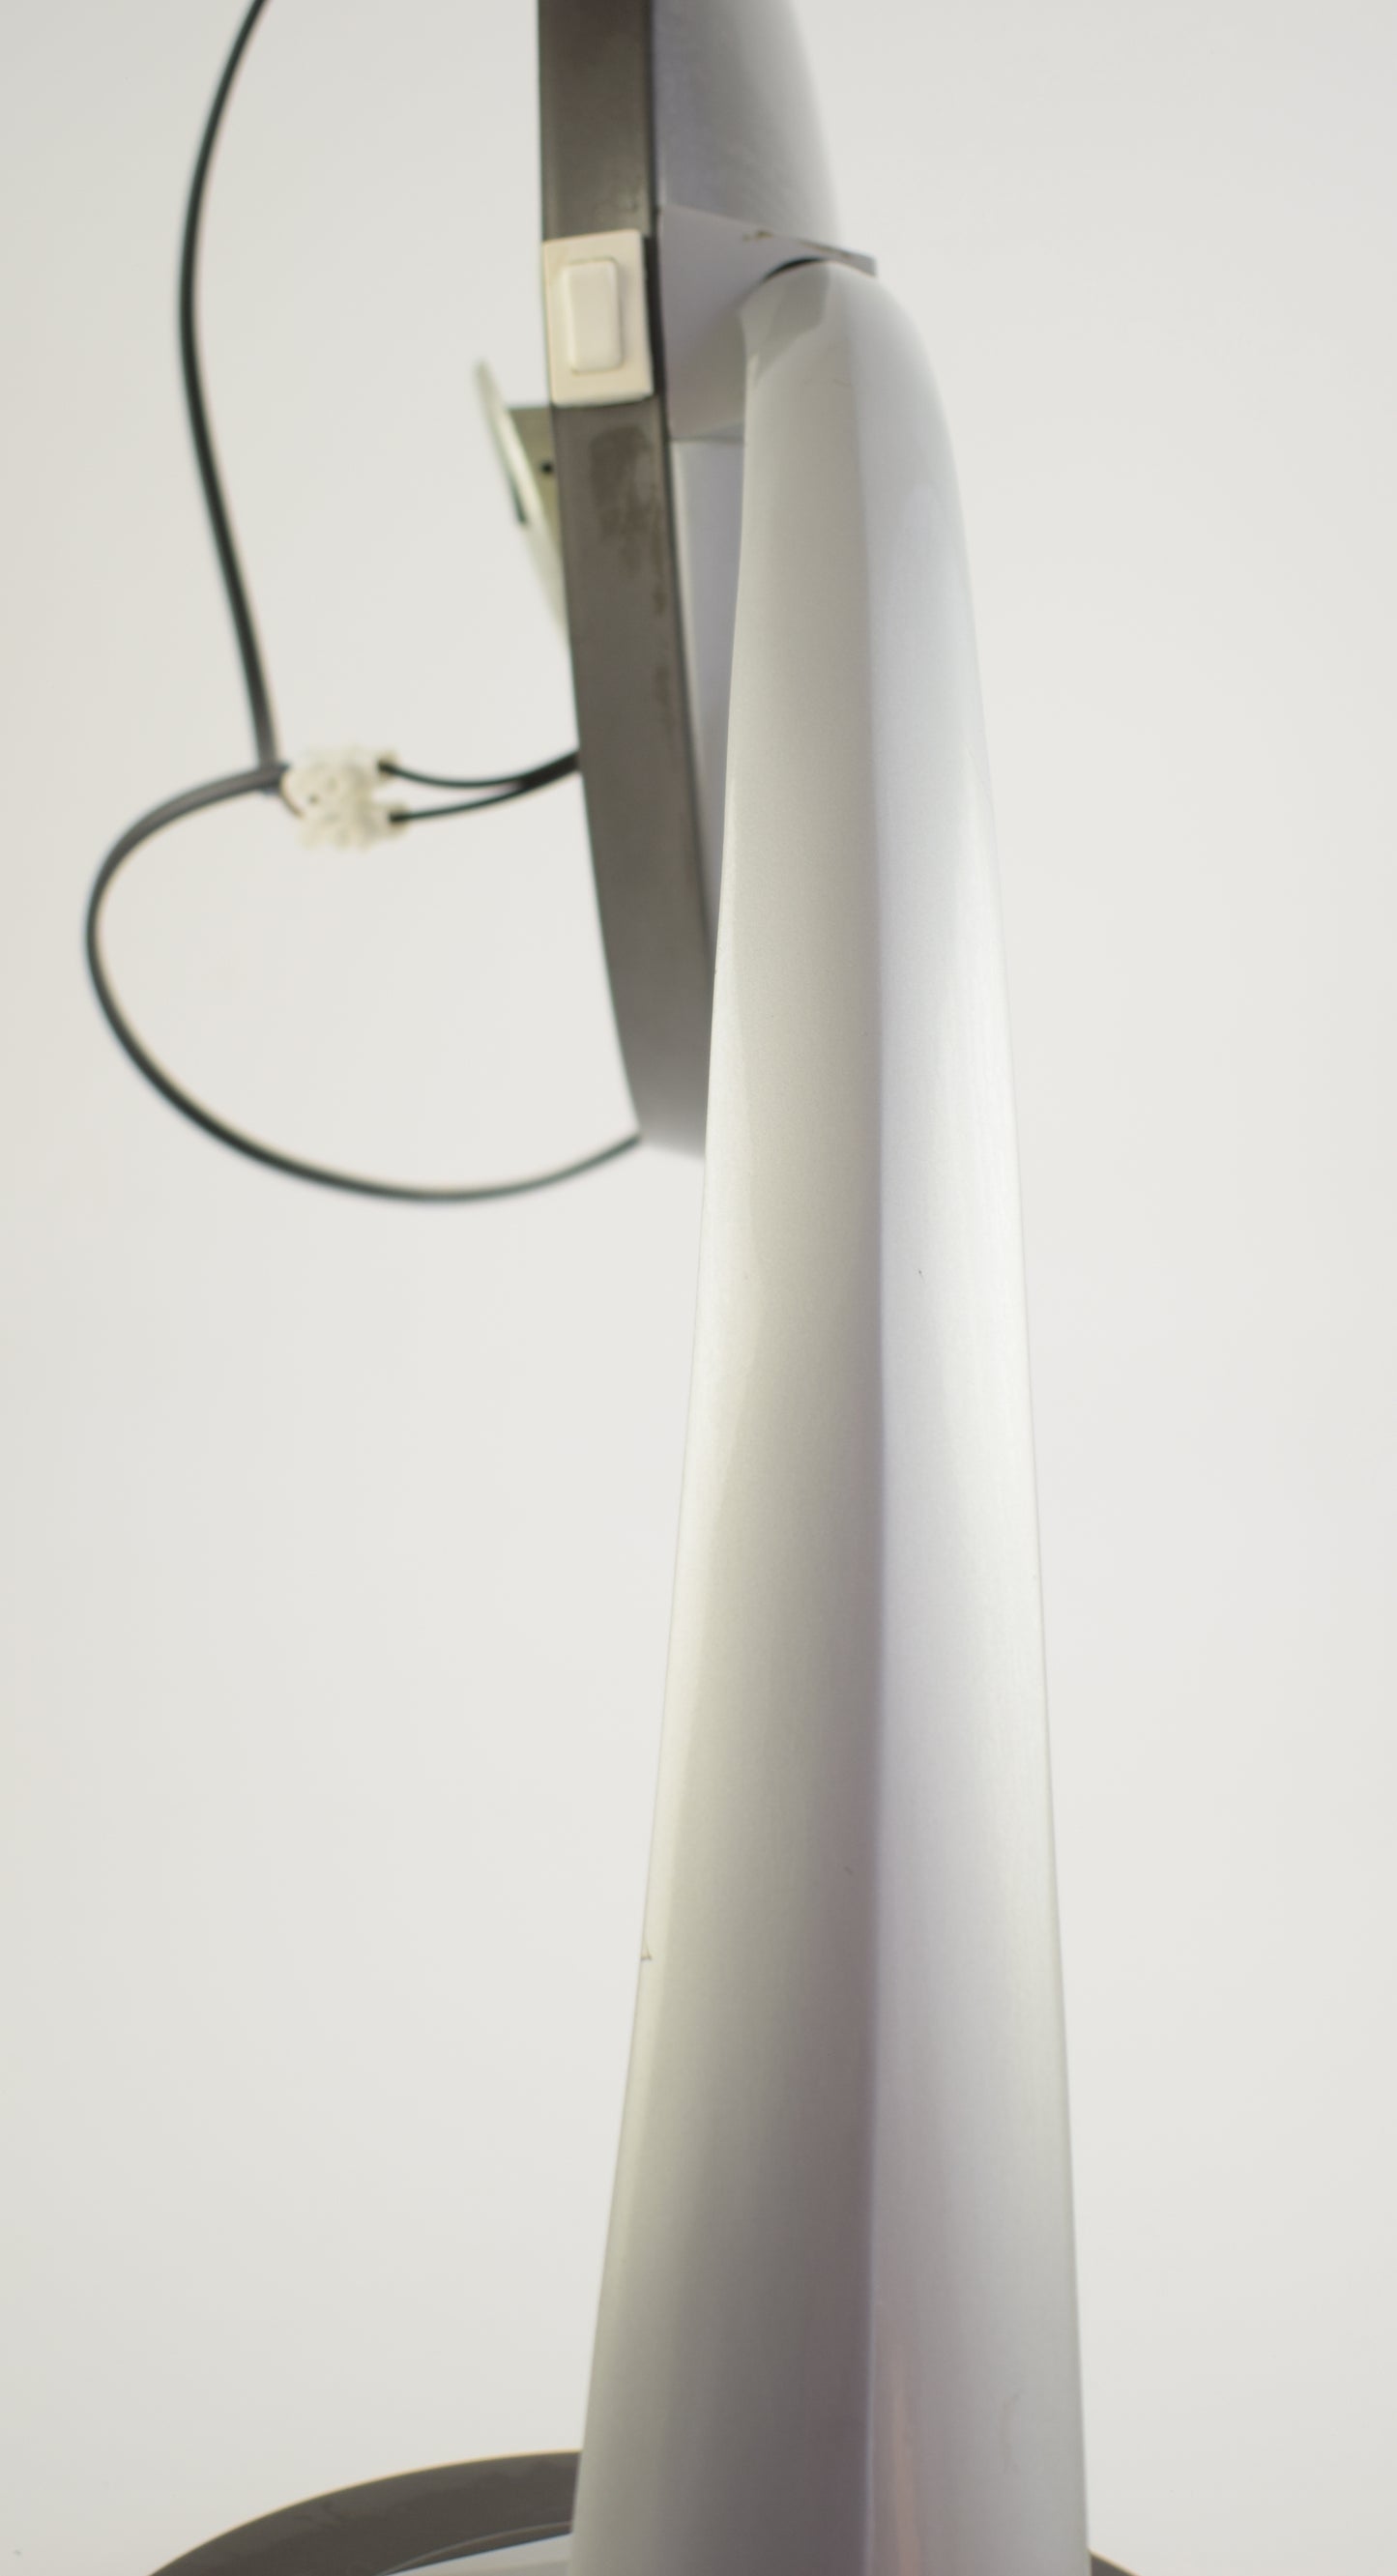 FASE BOOMERANG 2000 Heavy vintage Fase Lamp from Madrid designed in the late 1960s